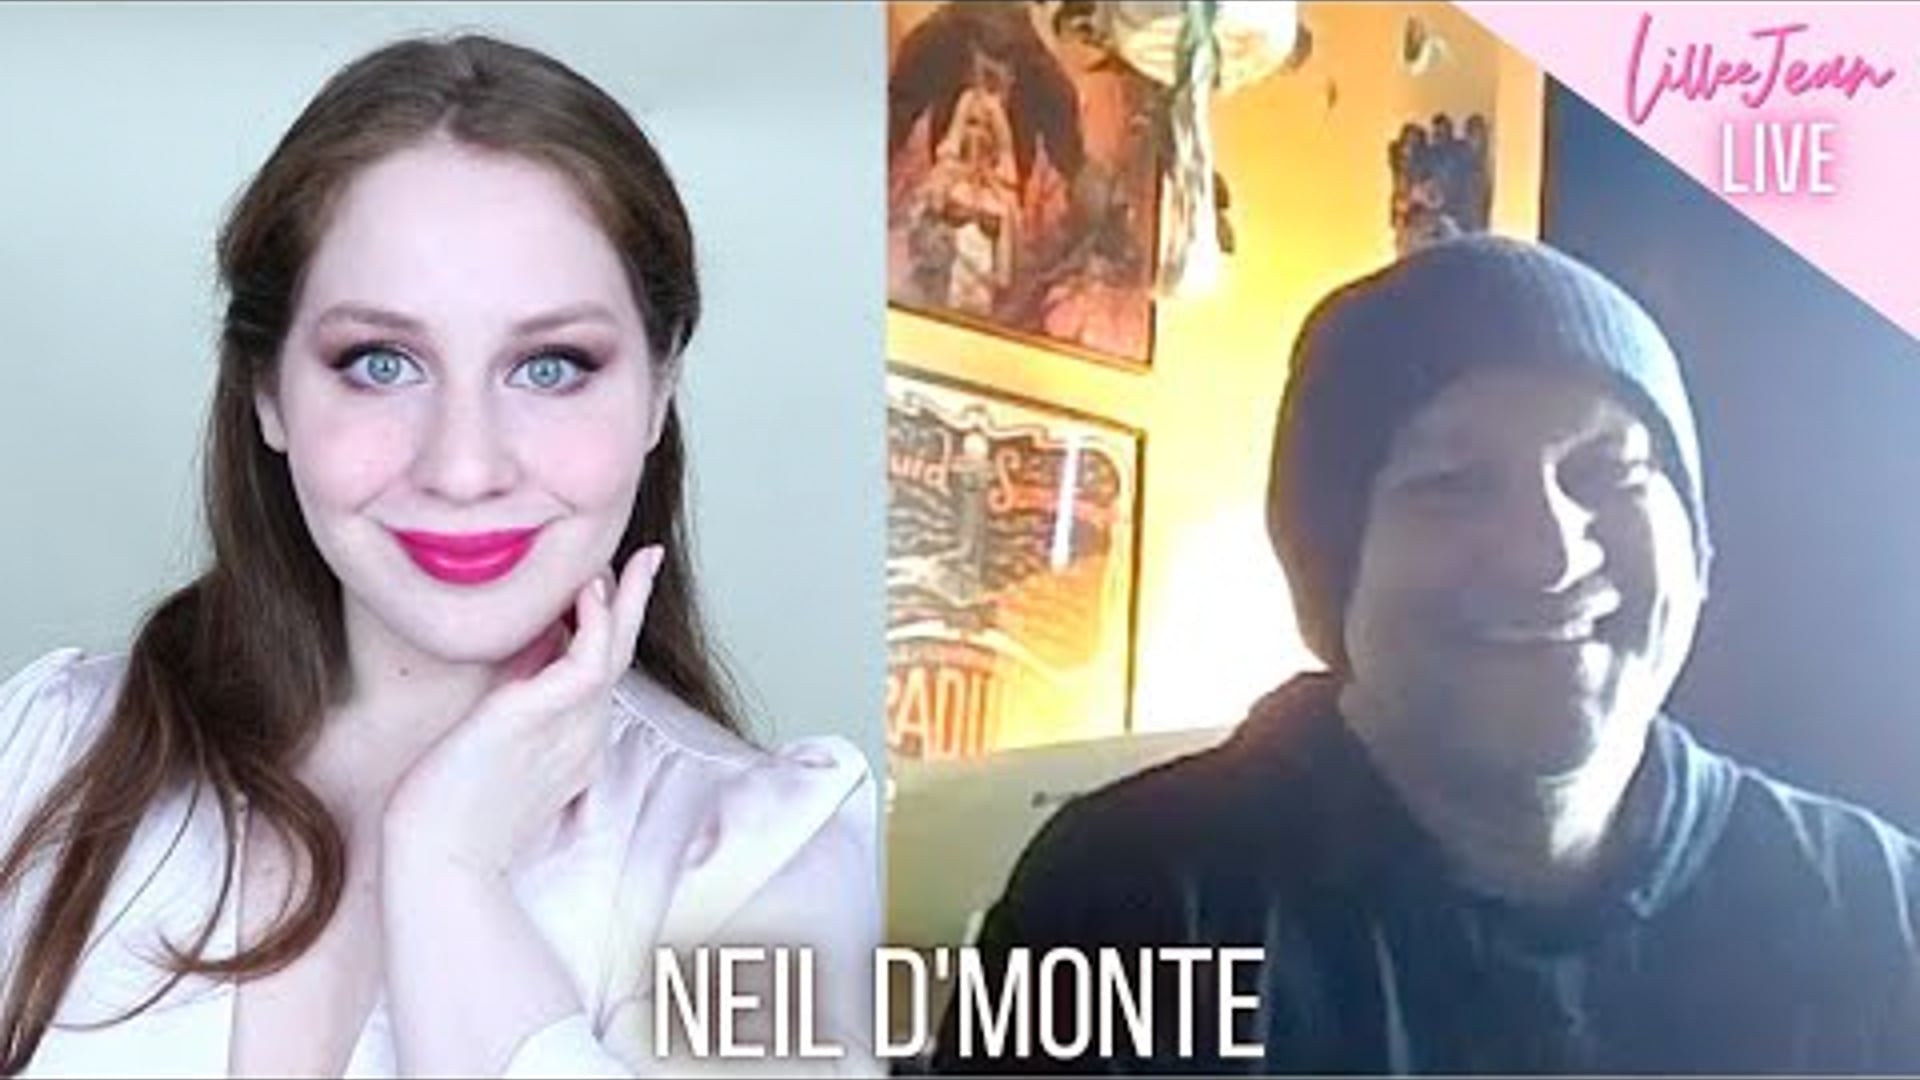 Lillee Jean TALKS! Live - Neil D'Monte - Hollywood Artist, Actor, Director, Musician | Ep. 3.02